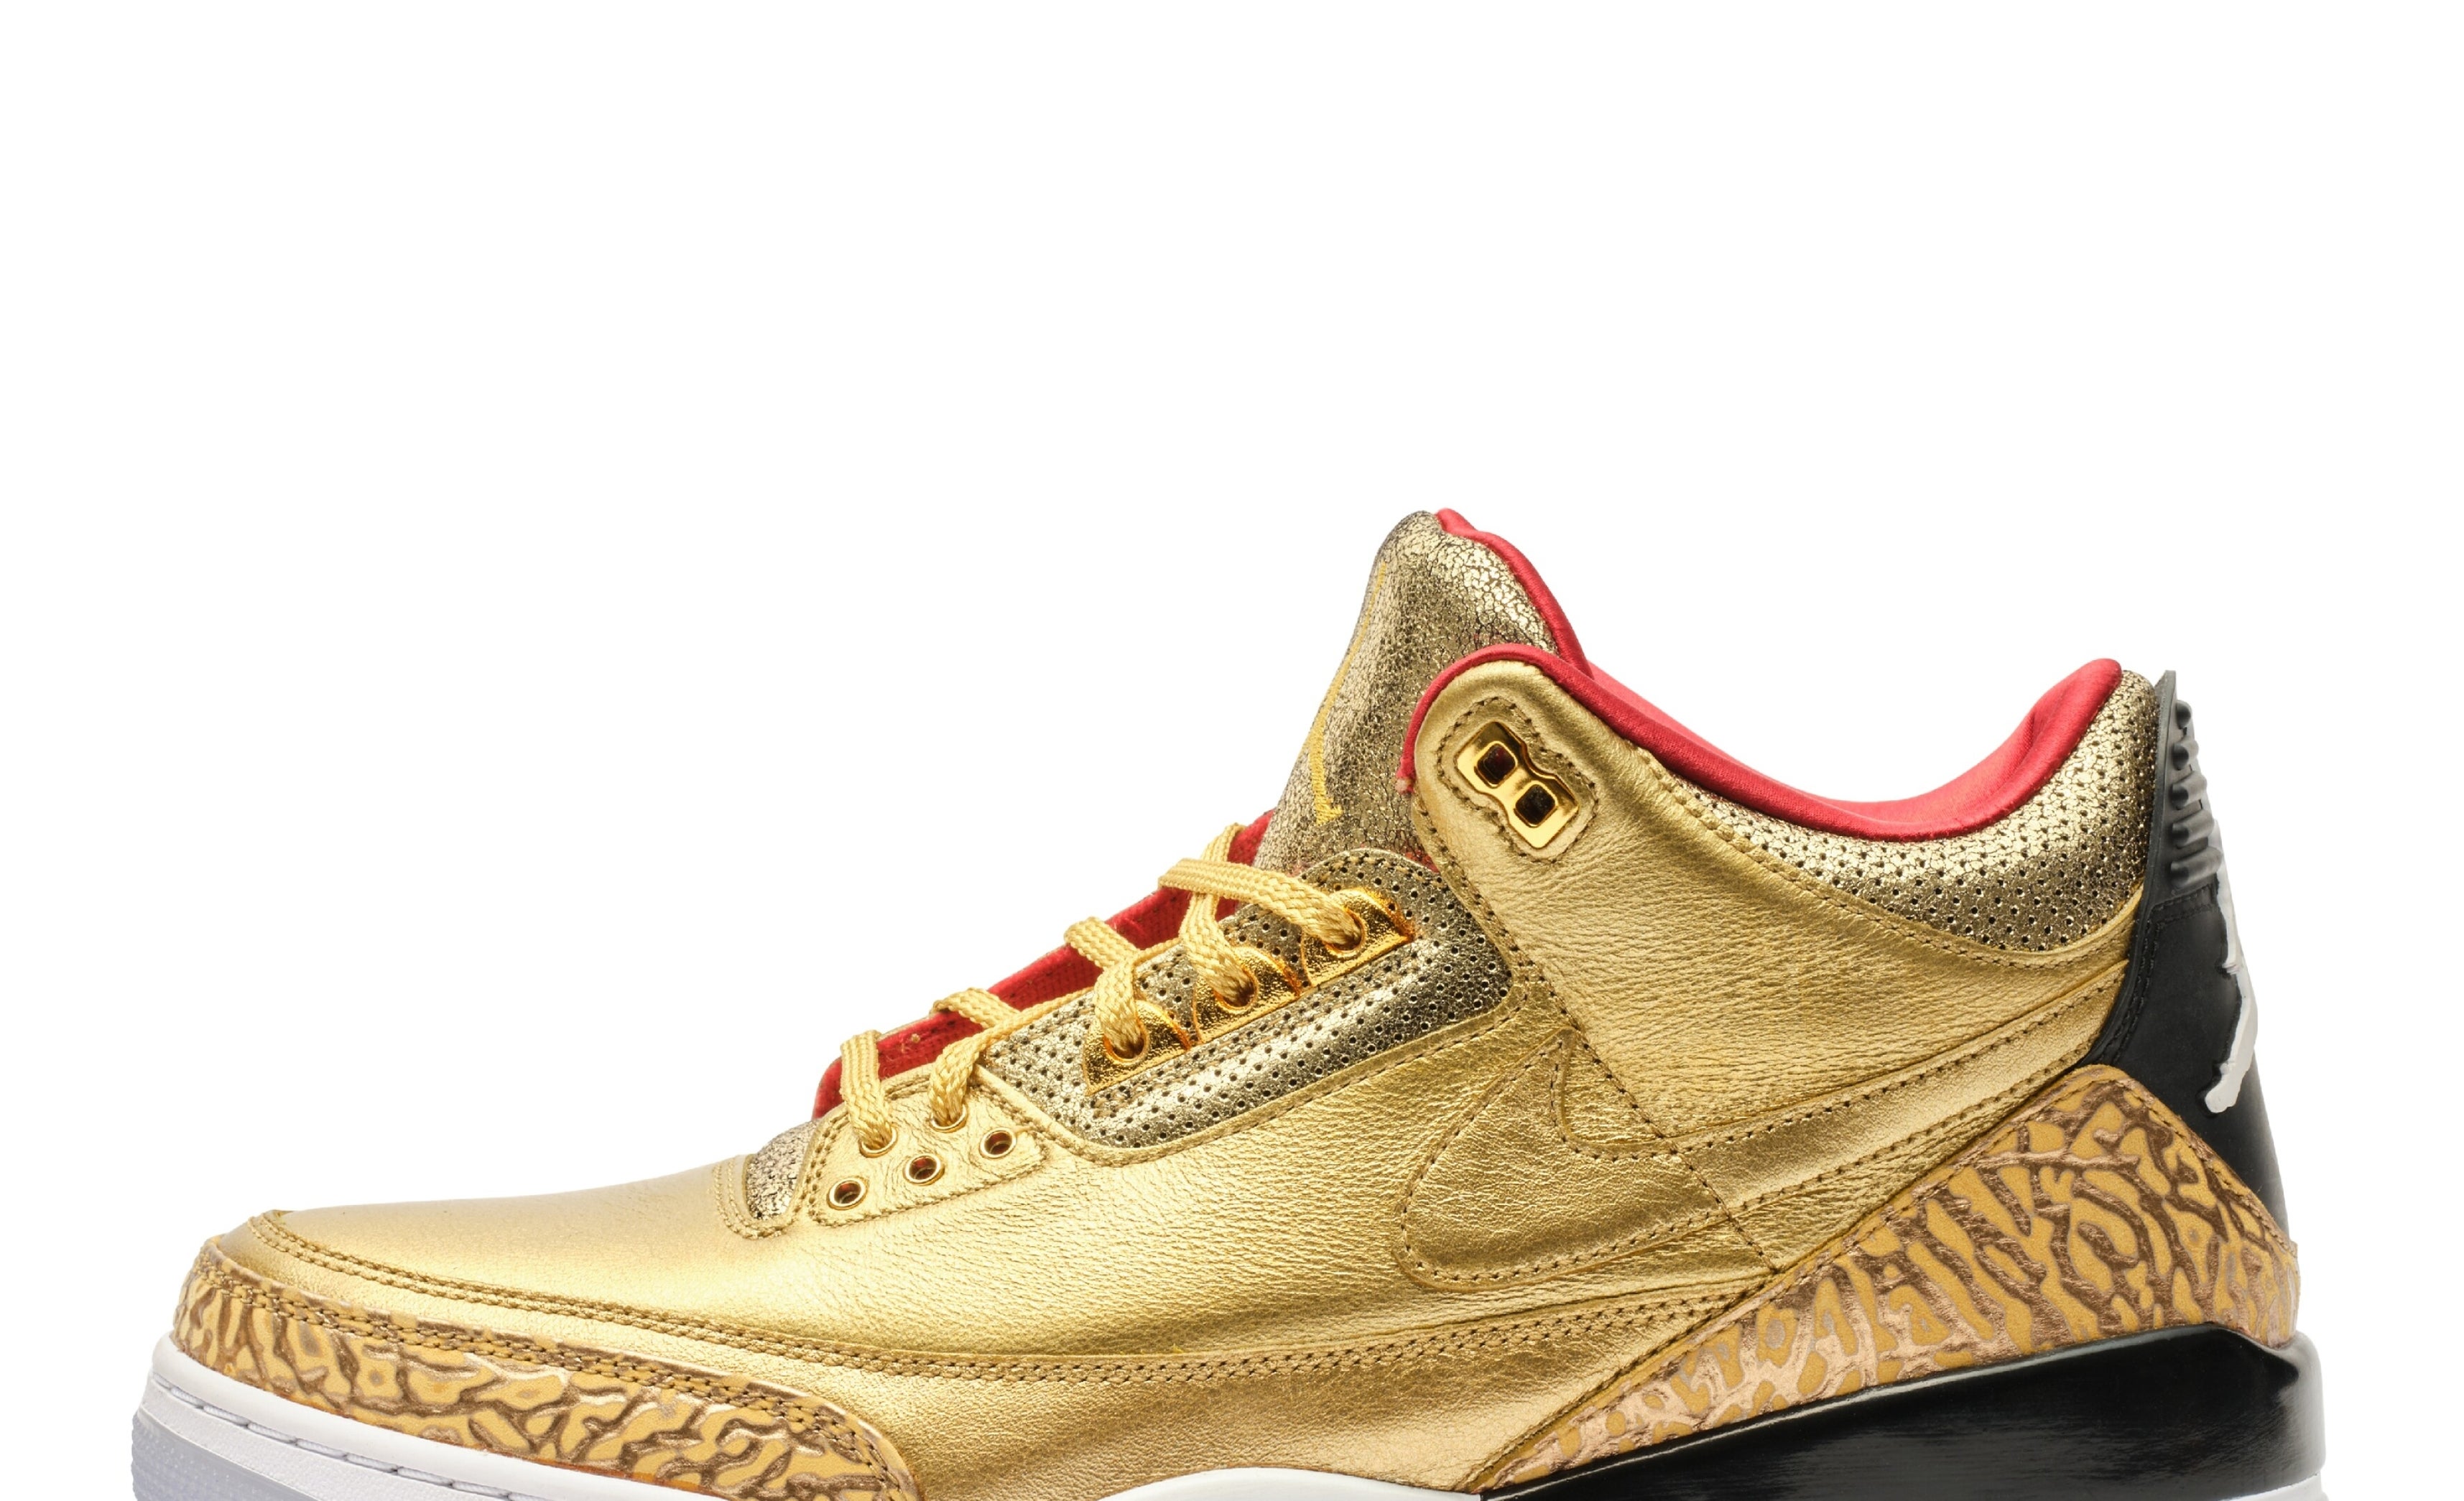 Gold is old, sneakers are its replacement